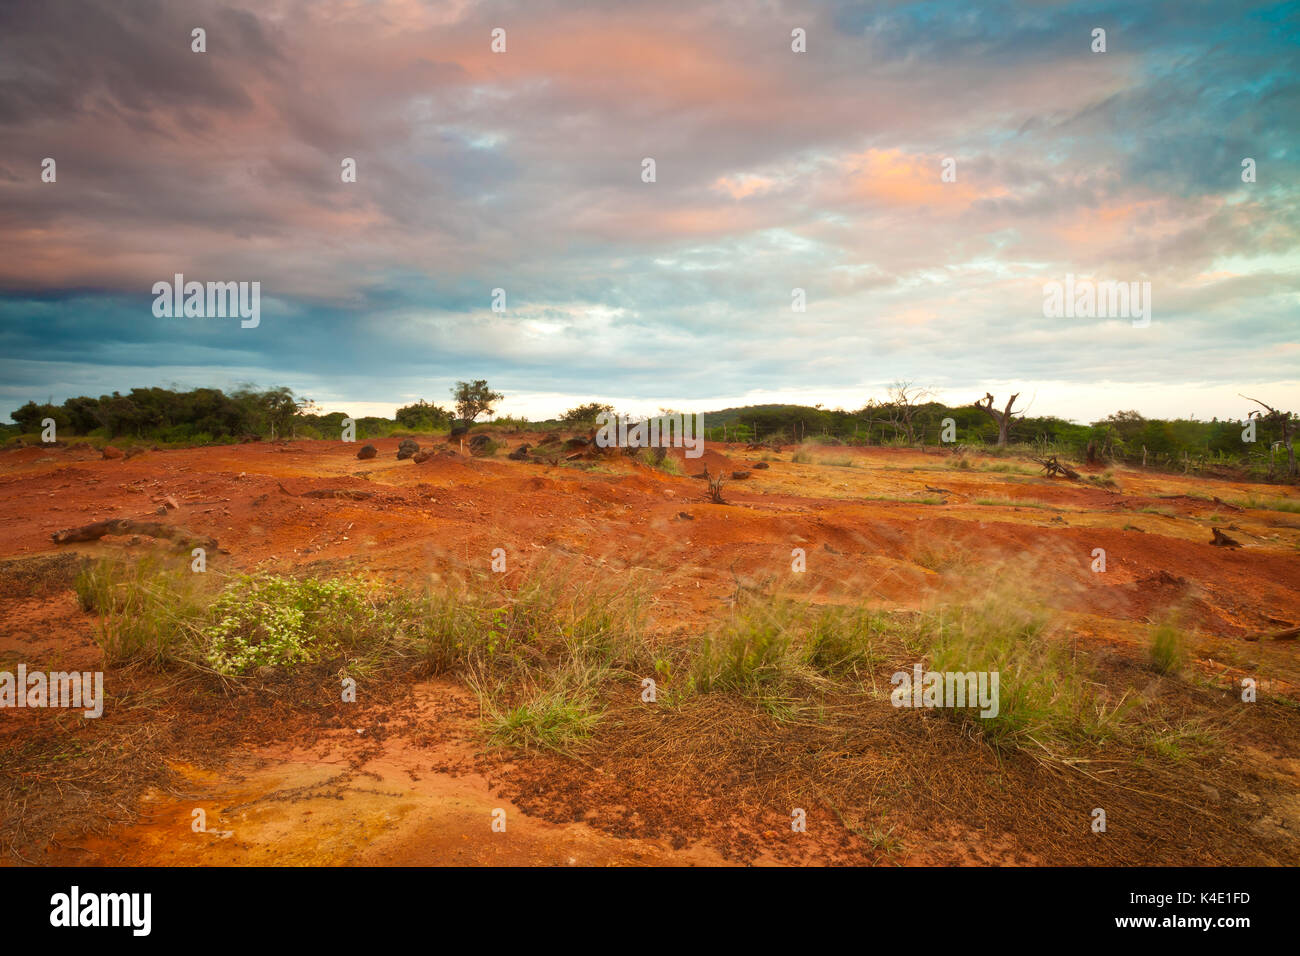 Panama landscape with evening light in the desert of Sarigua national park, Herrera province, Republic of Panama, Central America Stock Photo